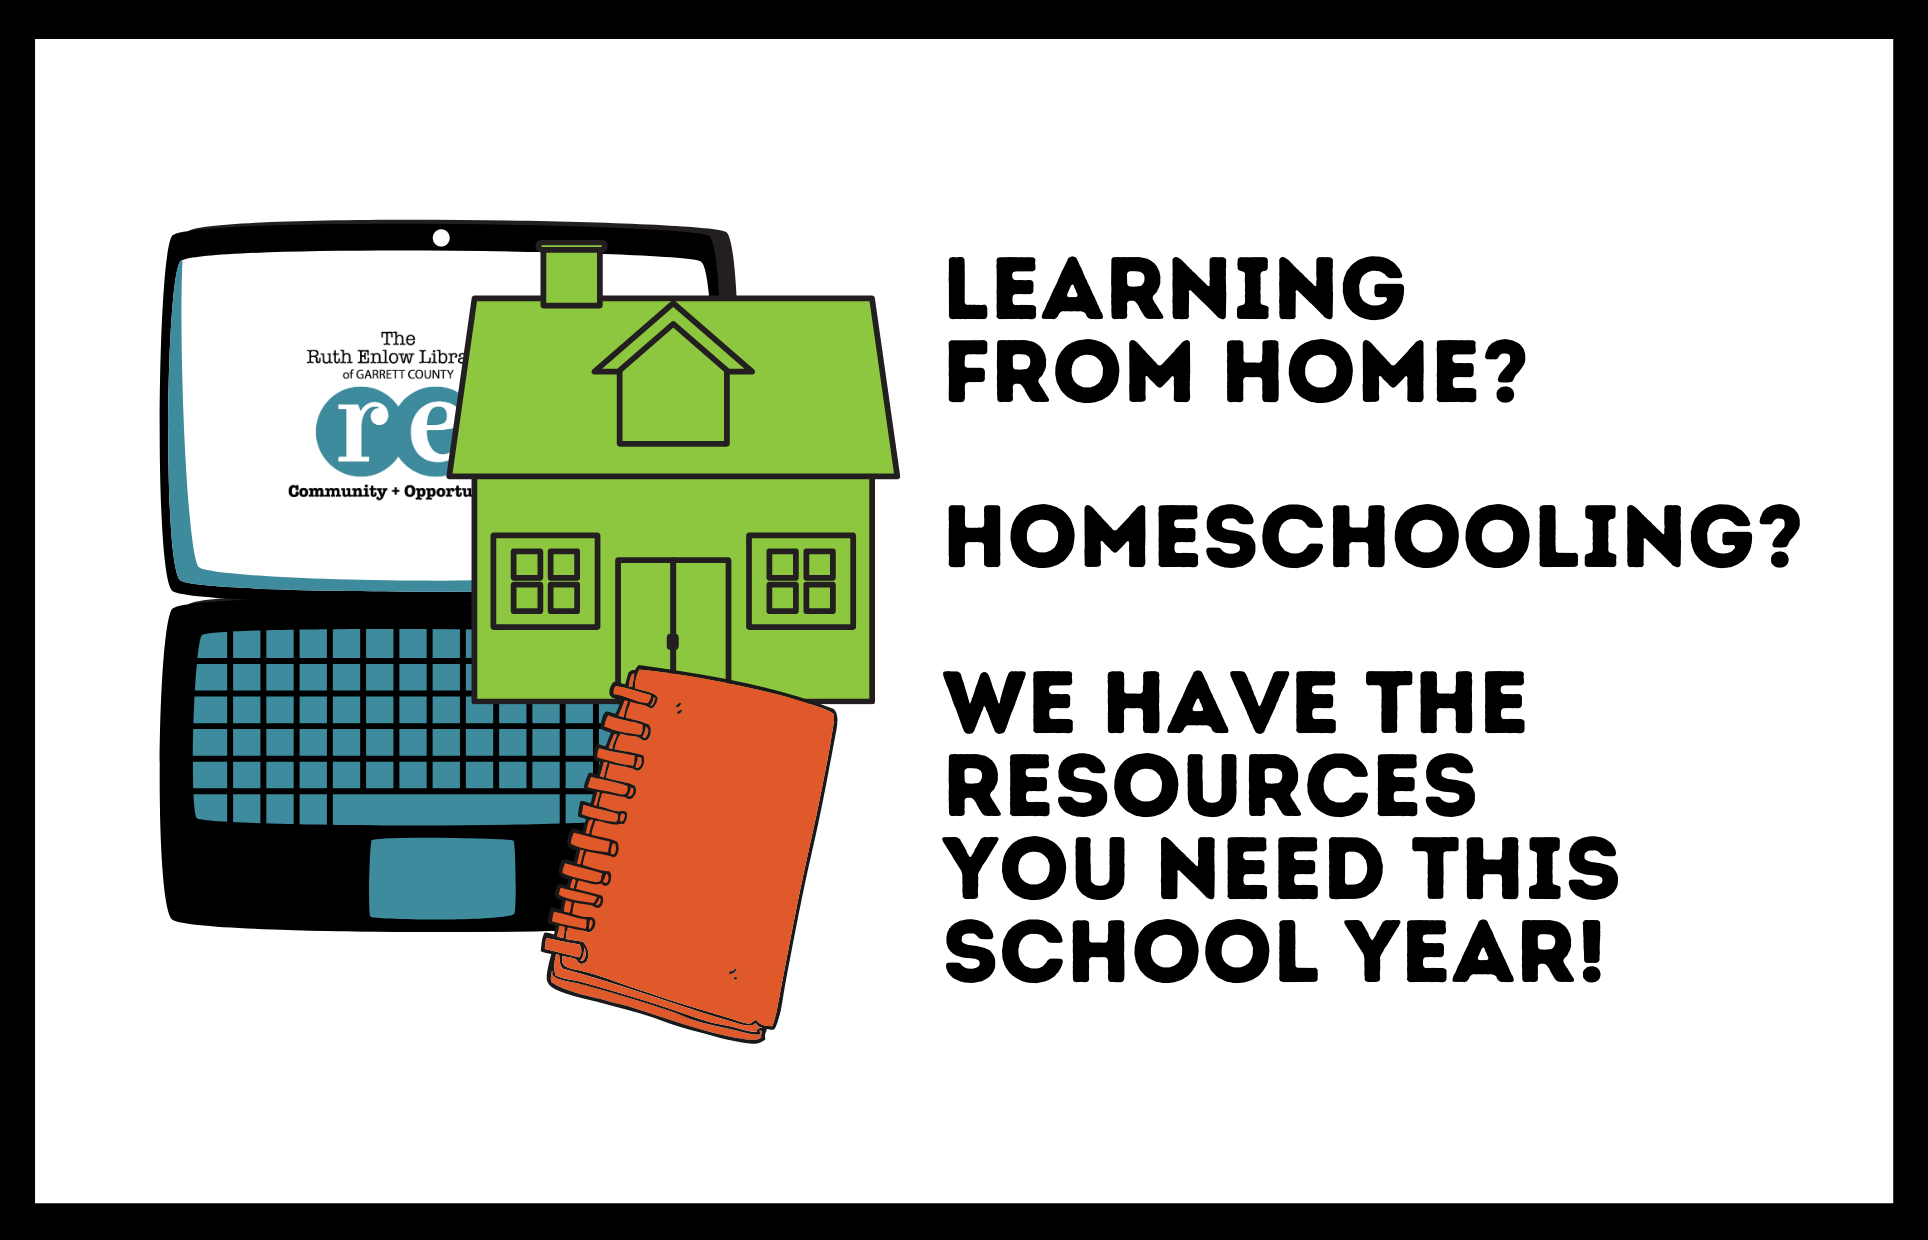 Resources for Learning at Home Homeschooling